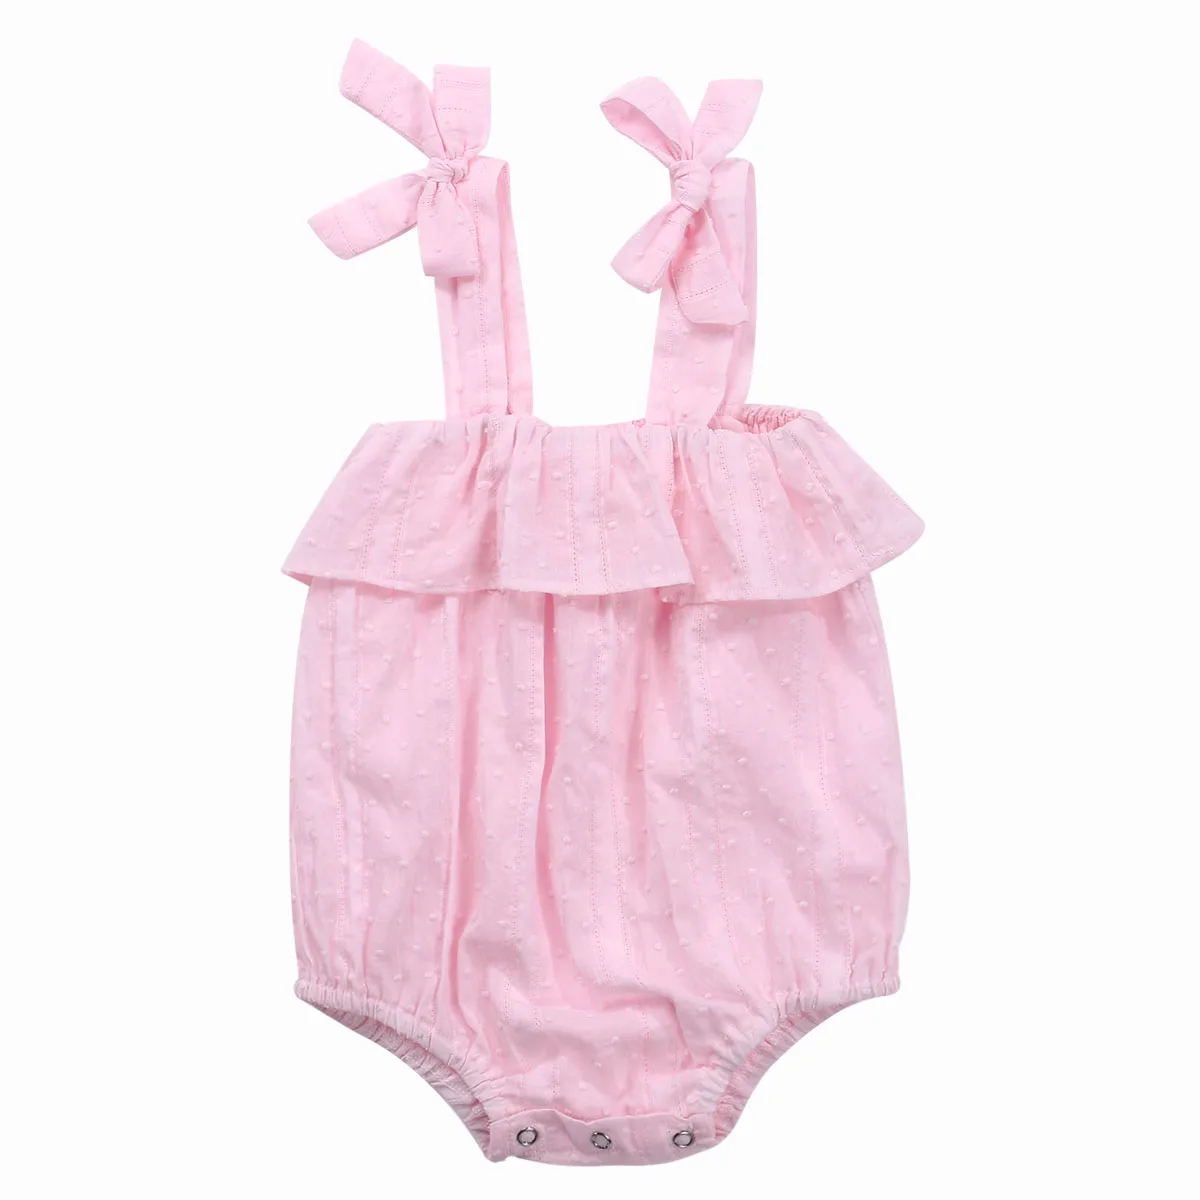 

Pudcoco Baby Girl Pink Cute Romper Solid Color 2020 Summer Bowknot Ruffled Neckline Sleeveless Jumpsuit 0-2T Clothing